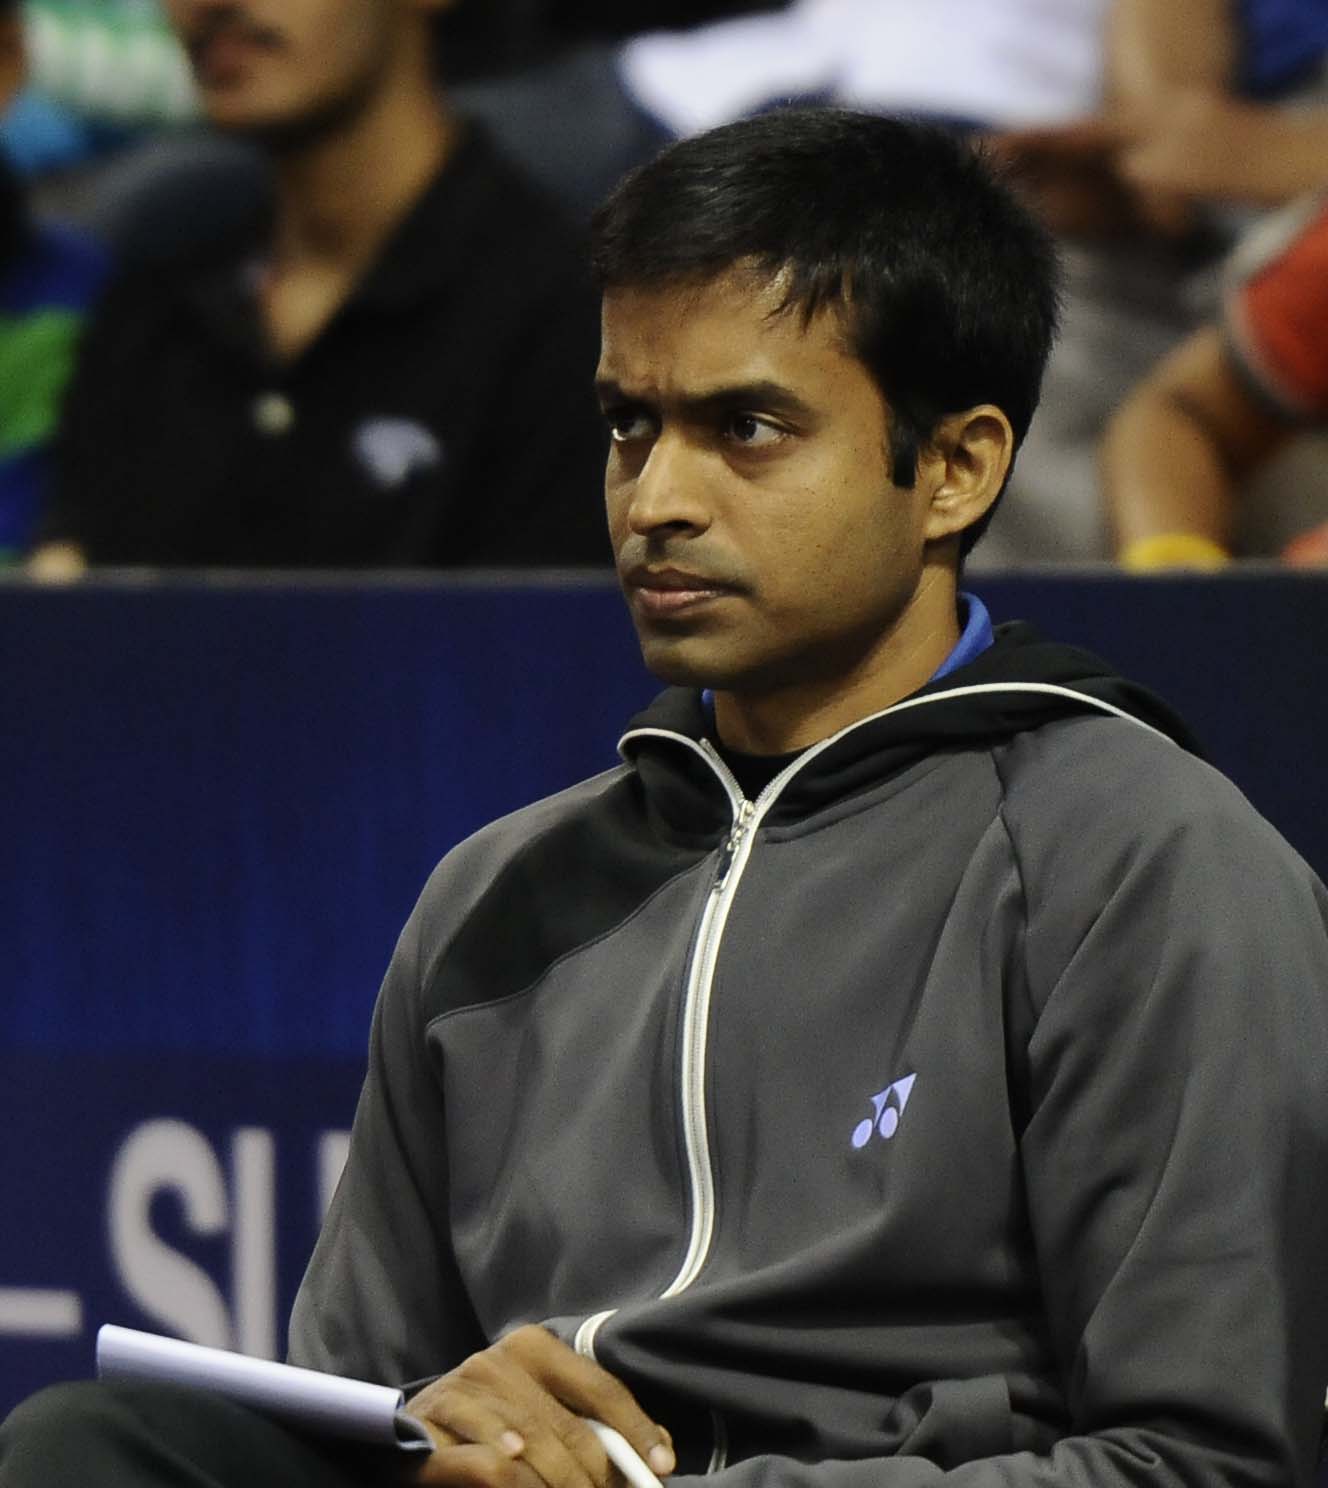 No movement on PV Sindhu’s new coach yet, says Pullela Gopichand